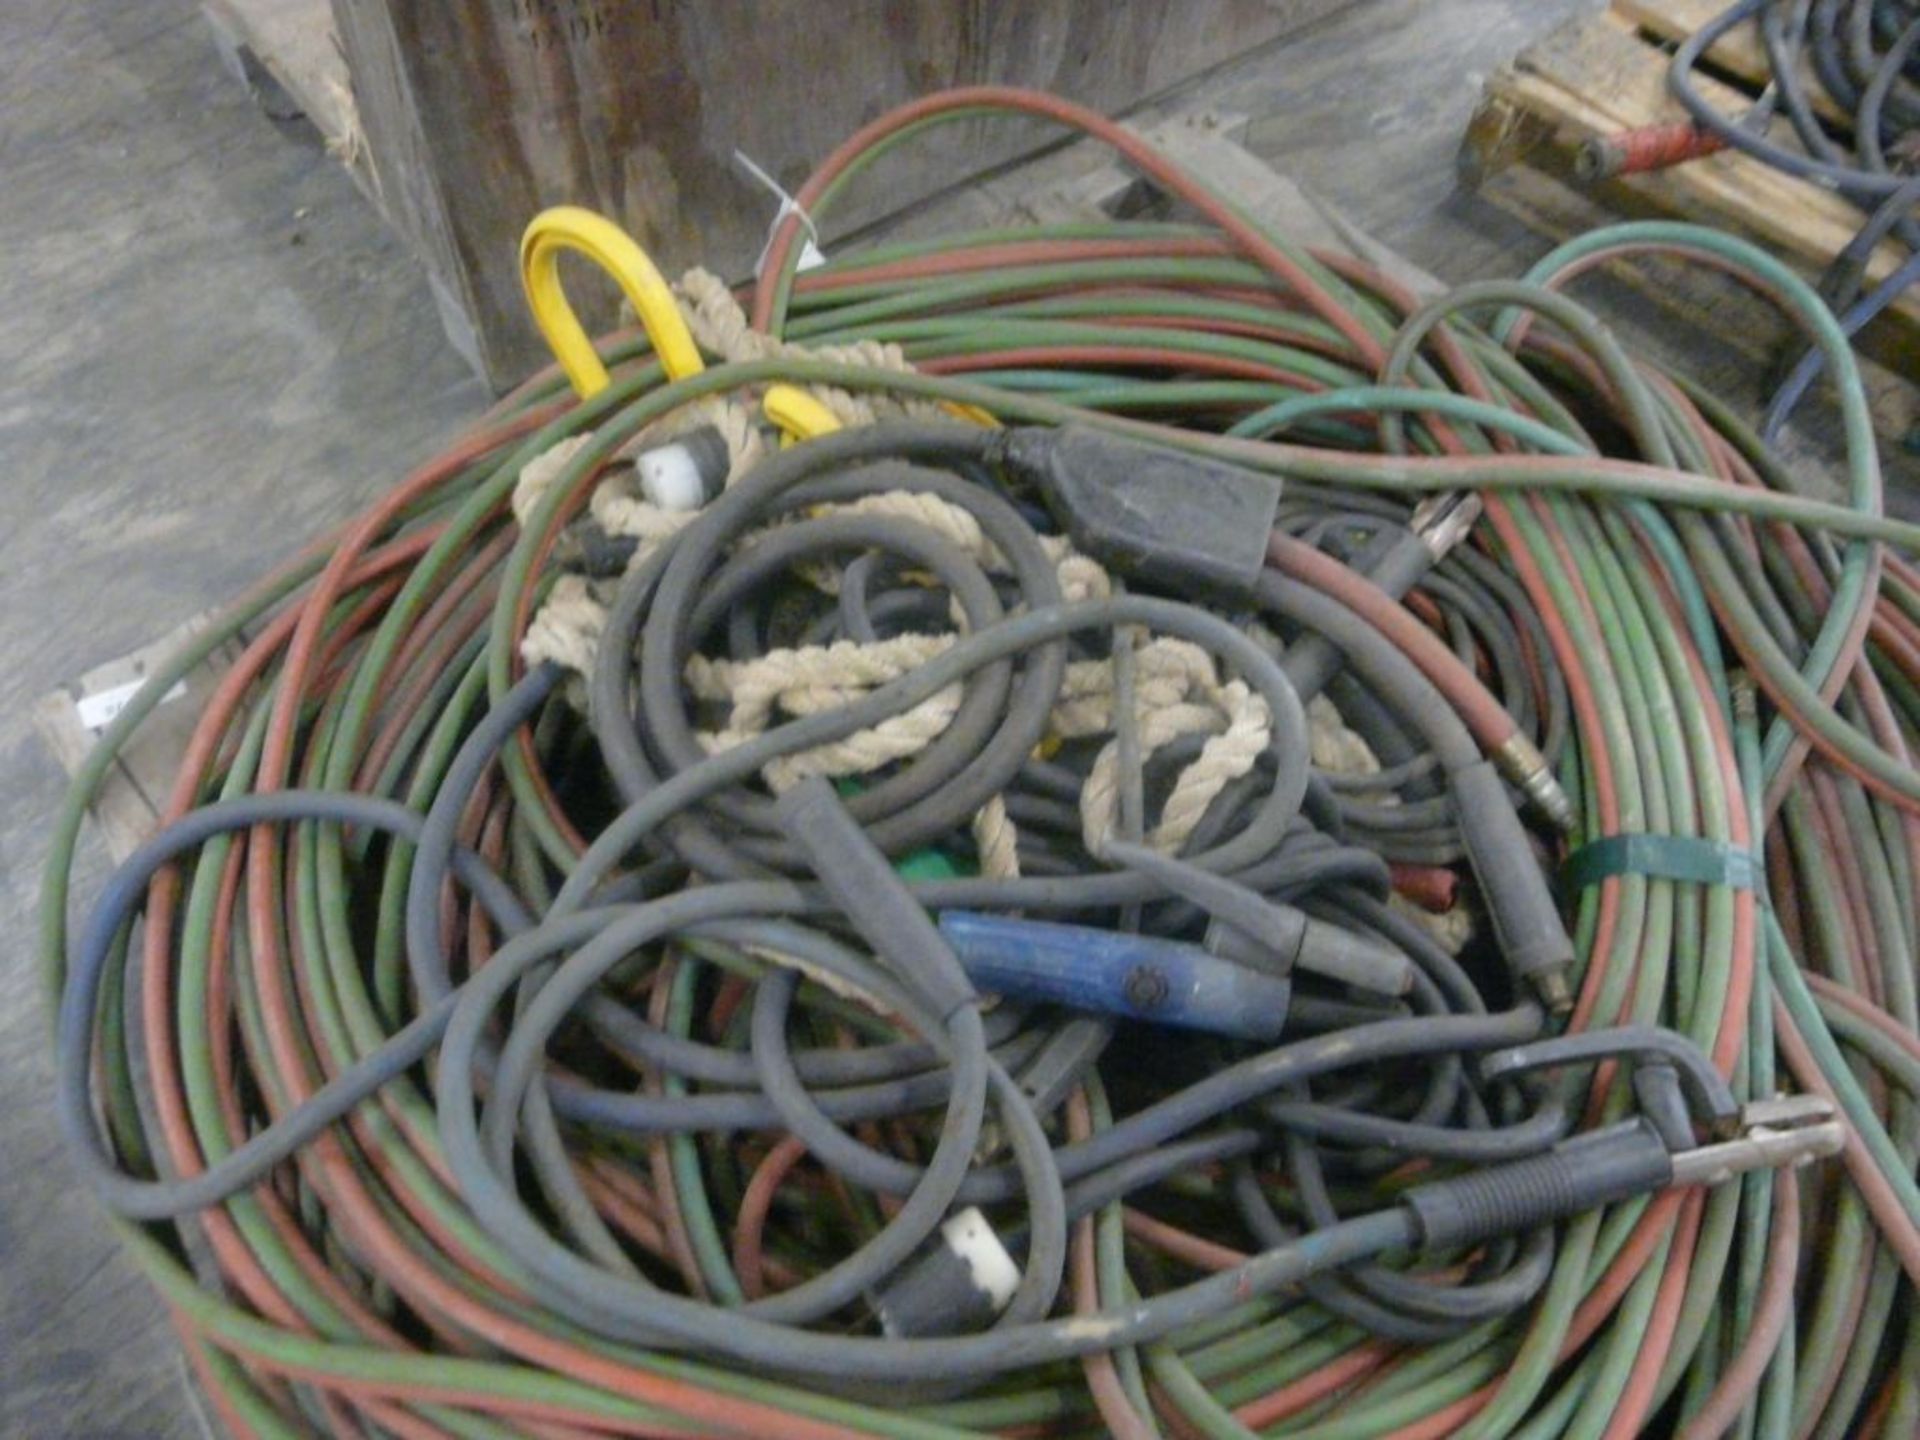 Lot of Assorted Leads, Power Cables, and Rope|144 lbs Including Pallet; Tag: 225338 - Image 3 of 4